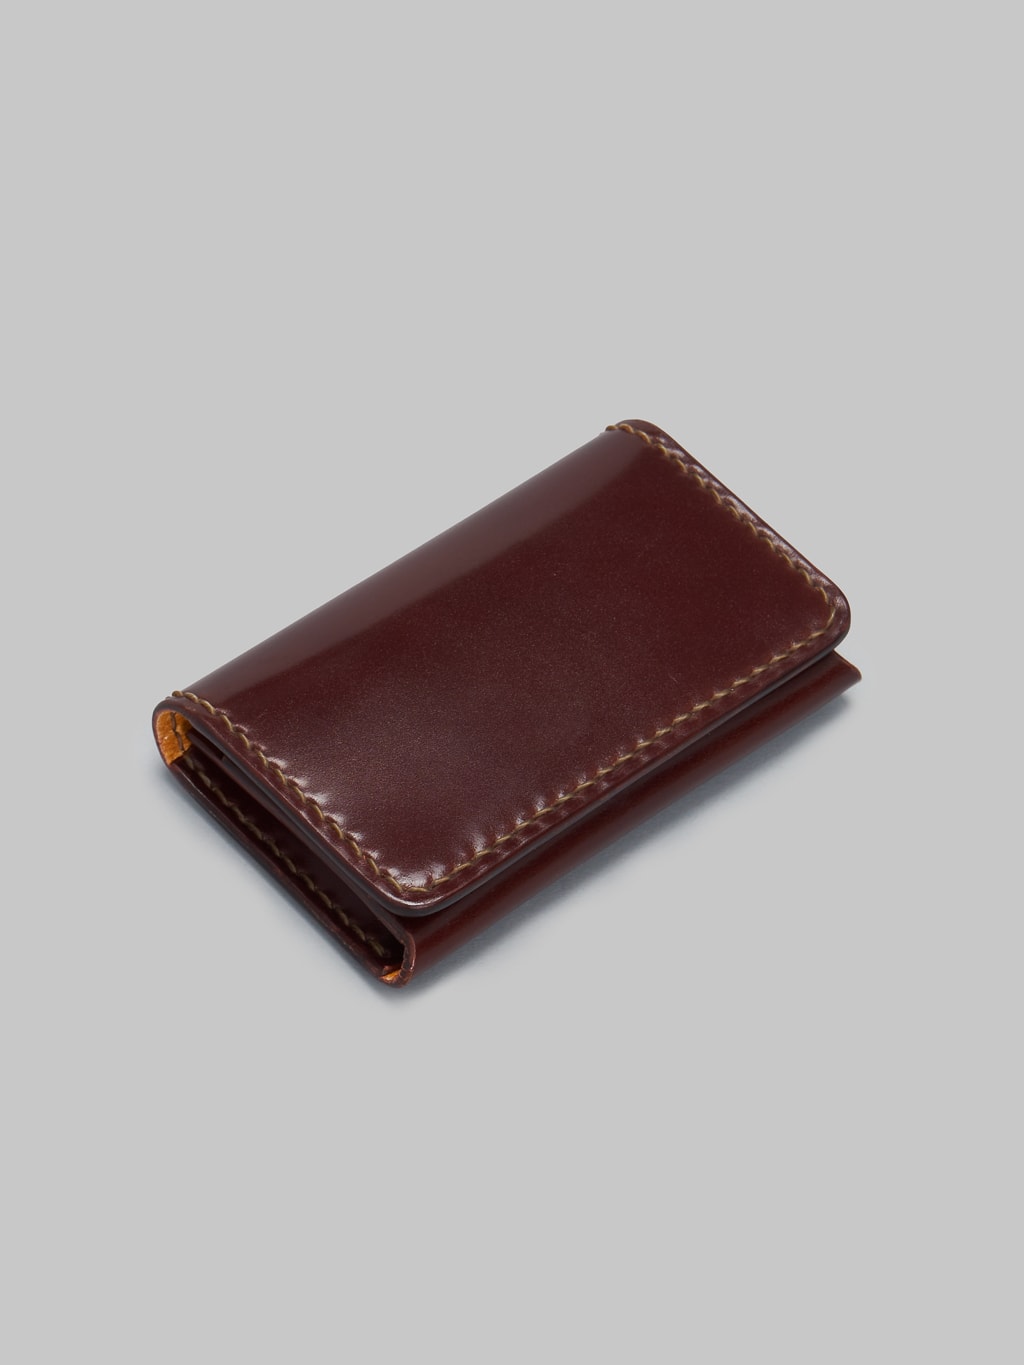 The Flat Head handsewn small cordovan card case brown